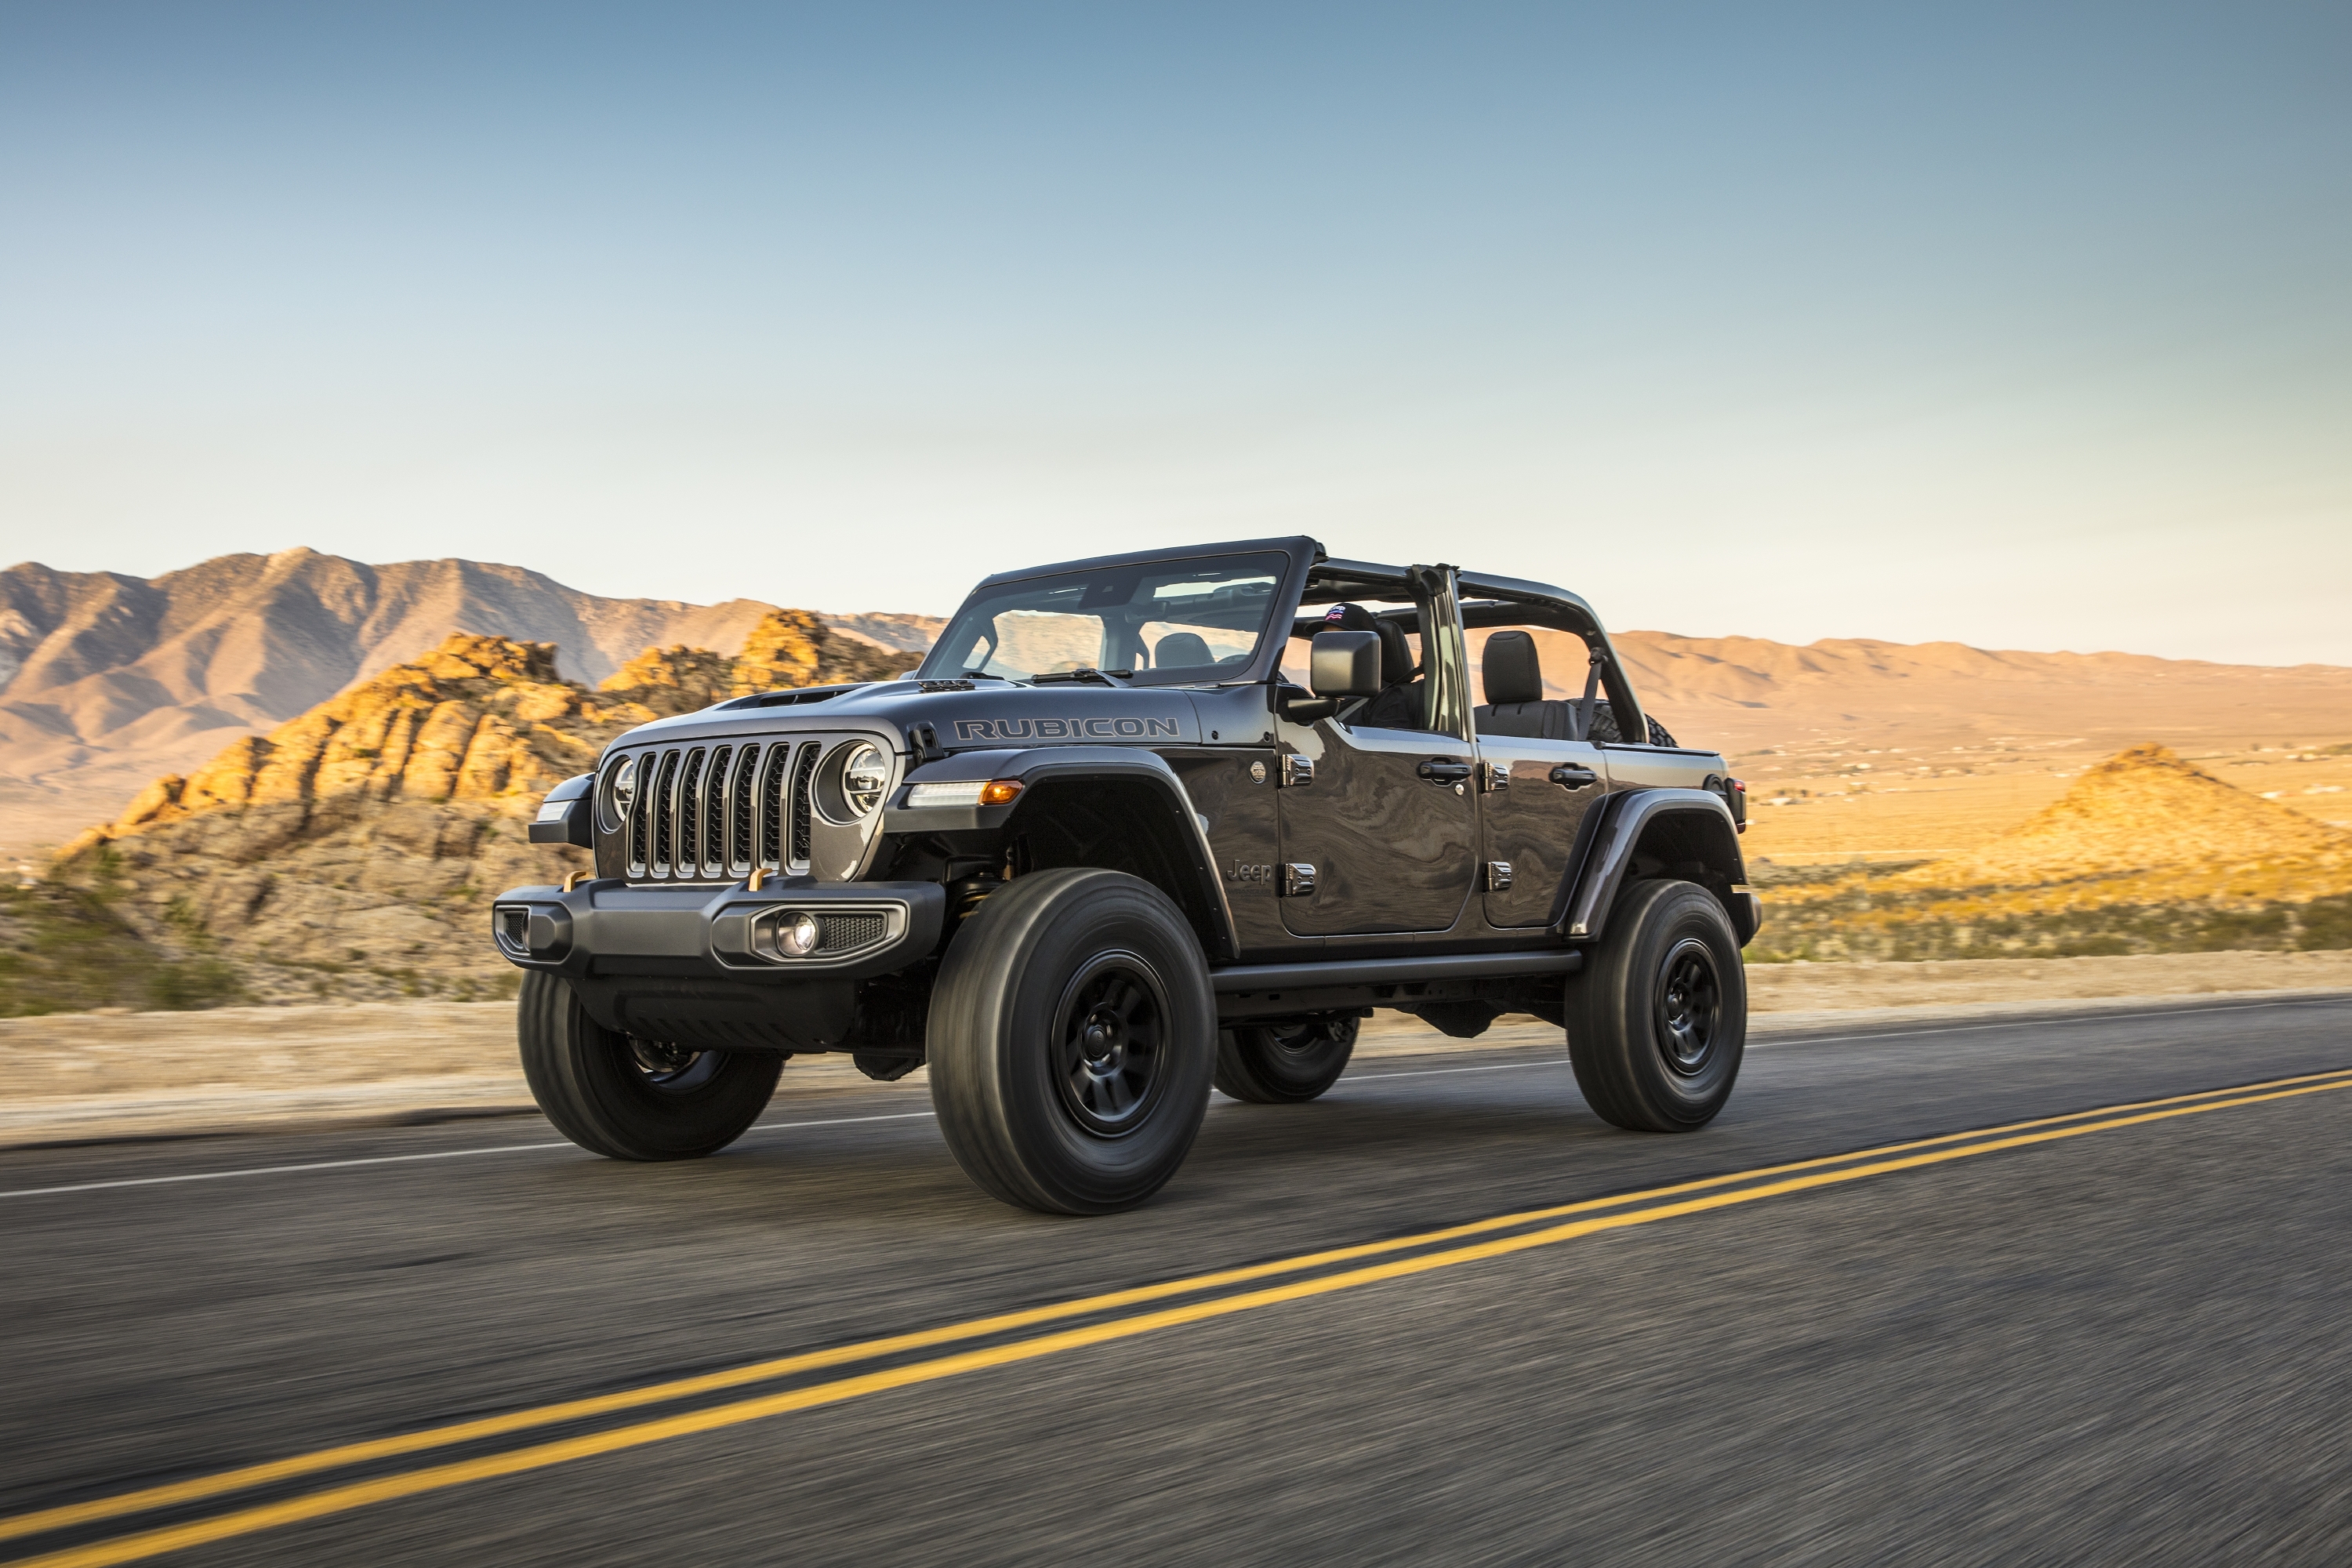 2021 Jeep Wrangler Rubicon 392 Packs a V-8 Off-Road Punch